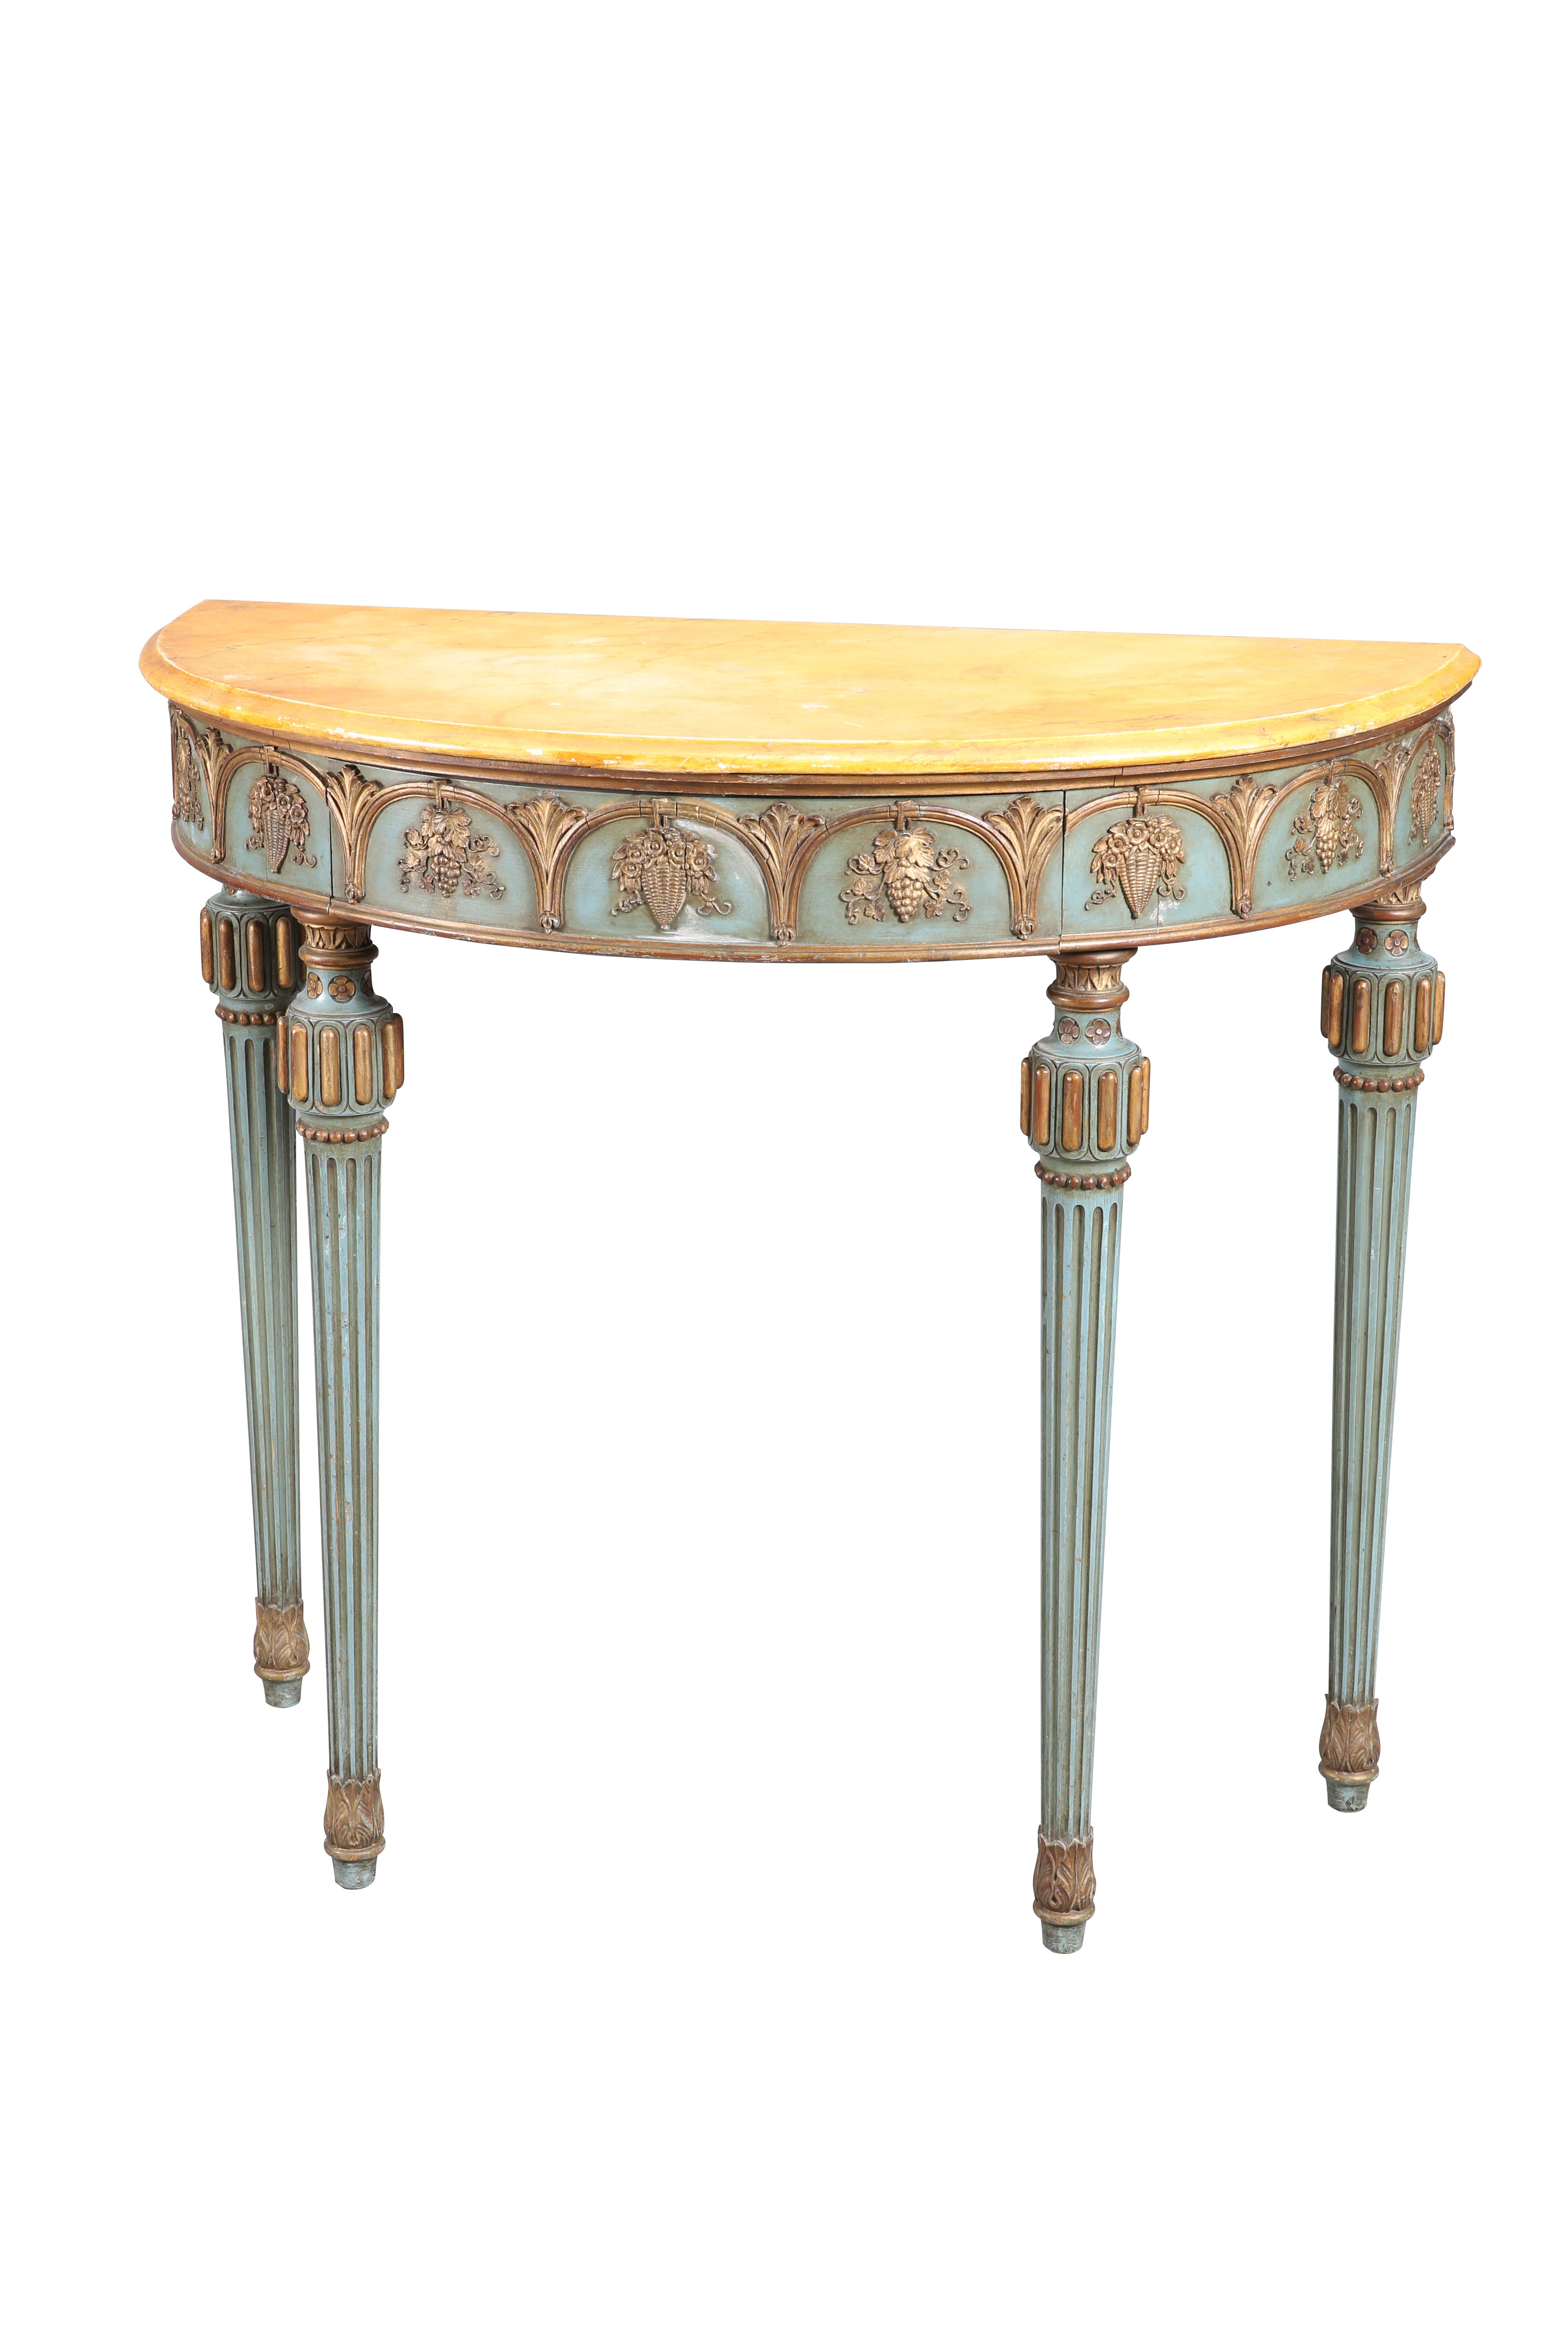 A PAINTED DEMILUNE CONSOLE TABLE